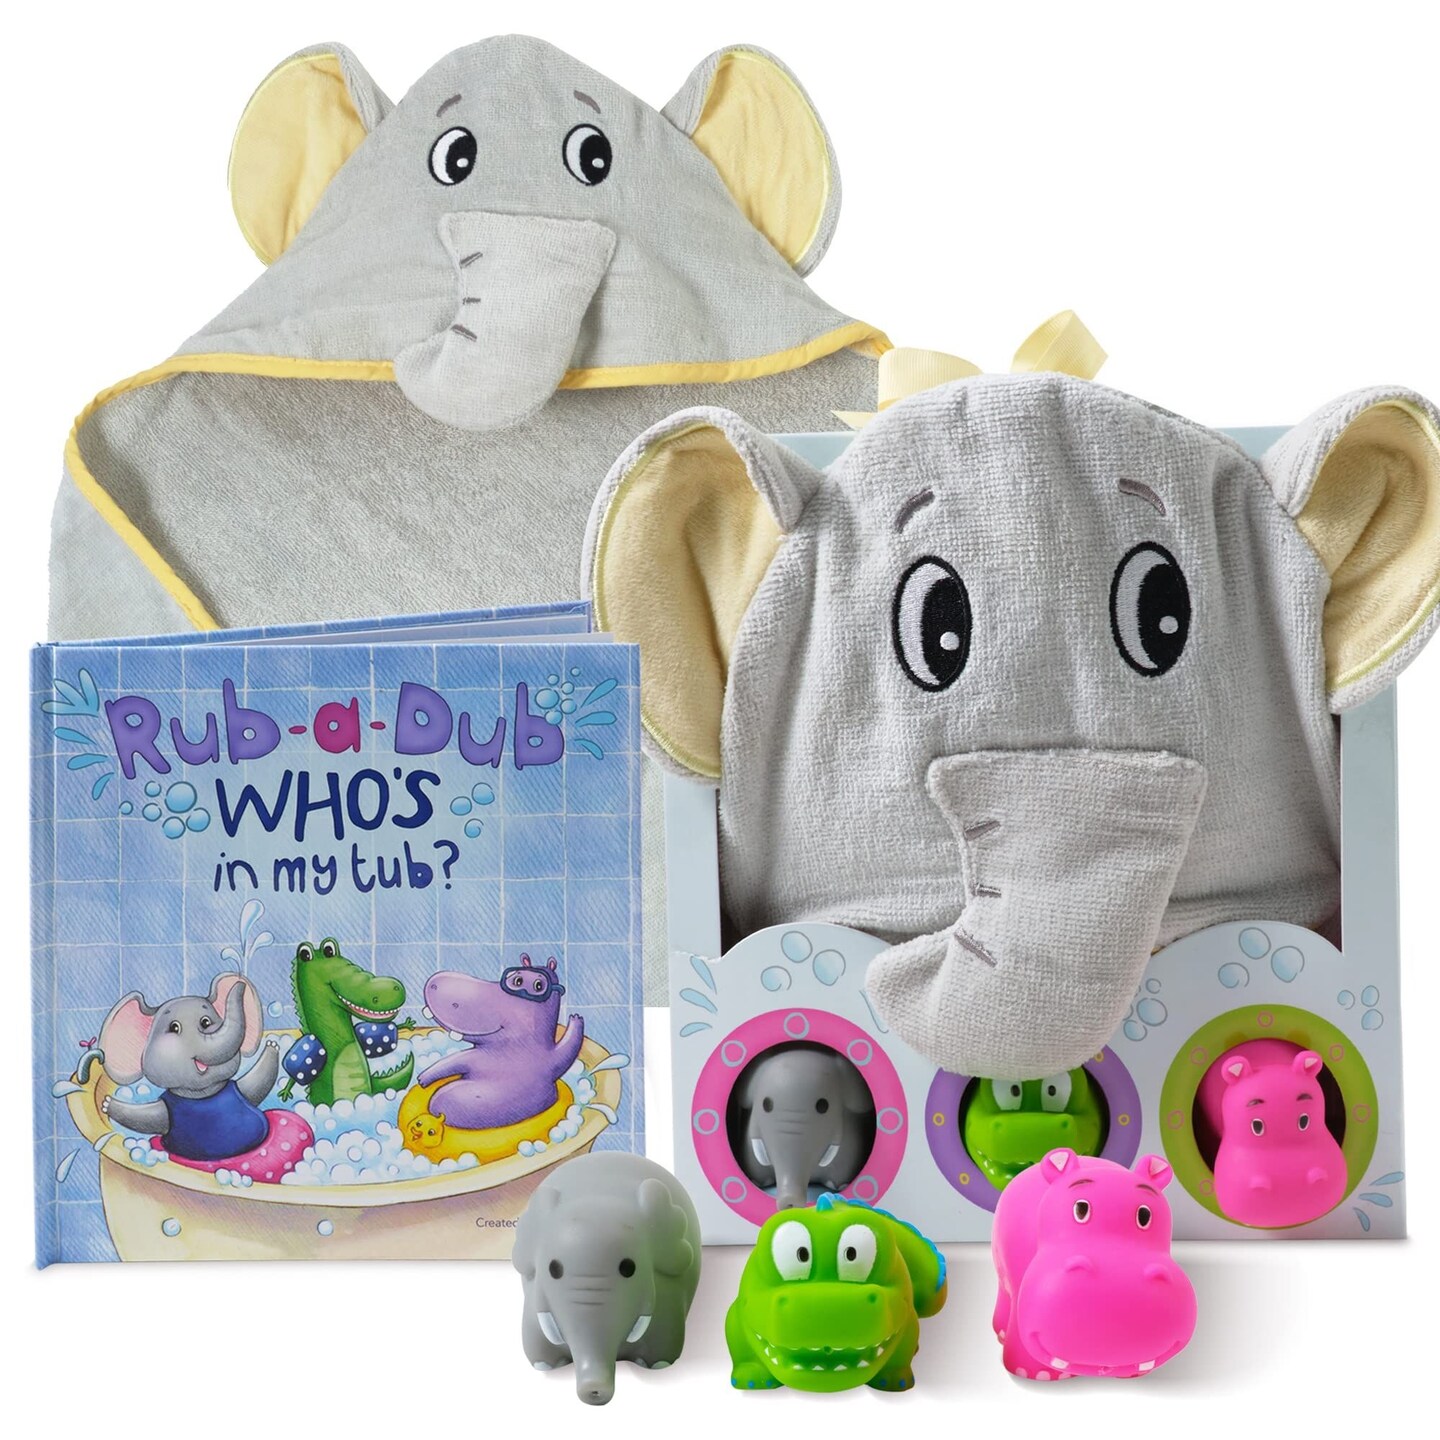 Tickle &#x26; Main Rub-a-Dub Gift Set, 5-Piece Bath Set Includes Elephant Hooded Towel, 3 Jungle Safari Squirt Toys, and Book for Boys and Girls!